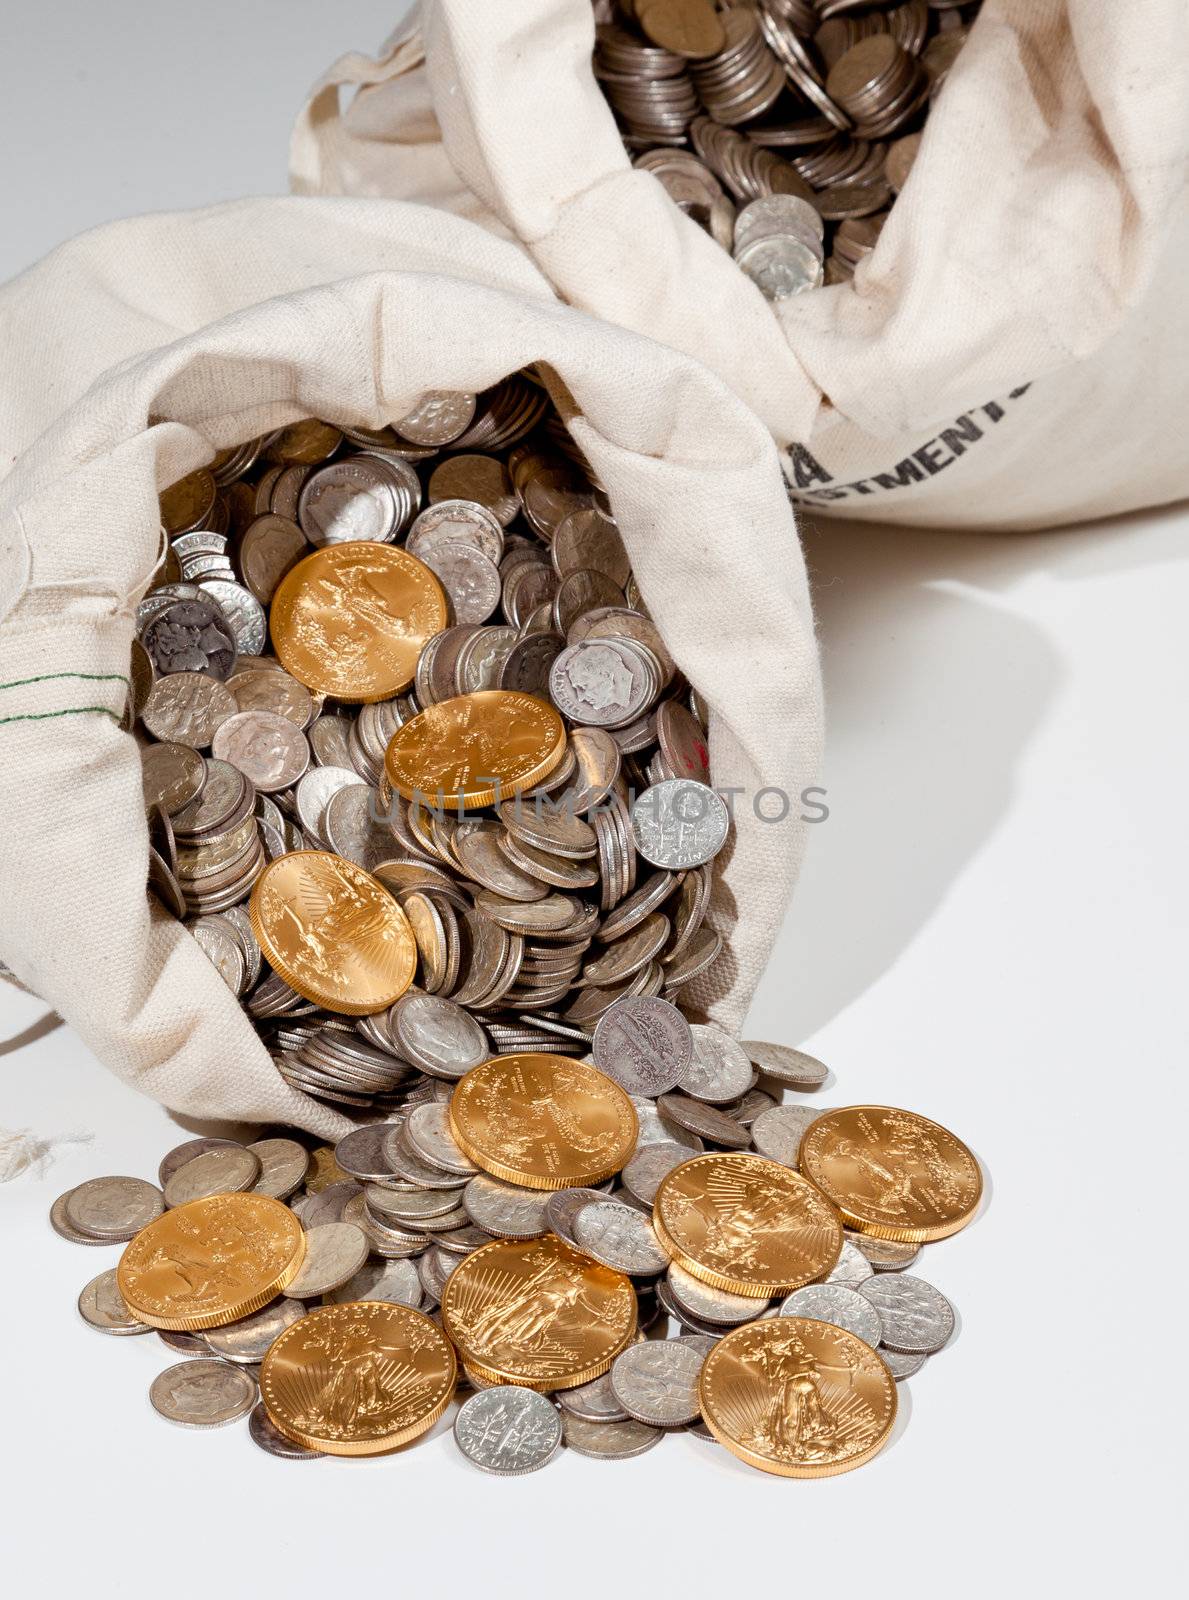 Bag of silver and gold coins by steheap